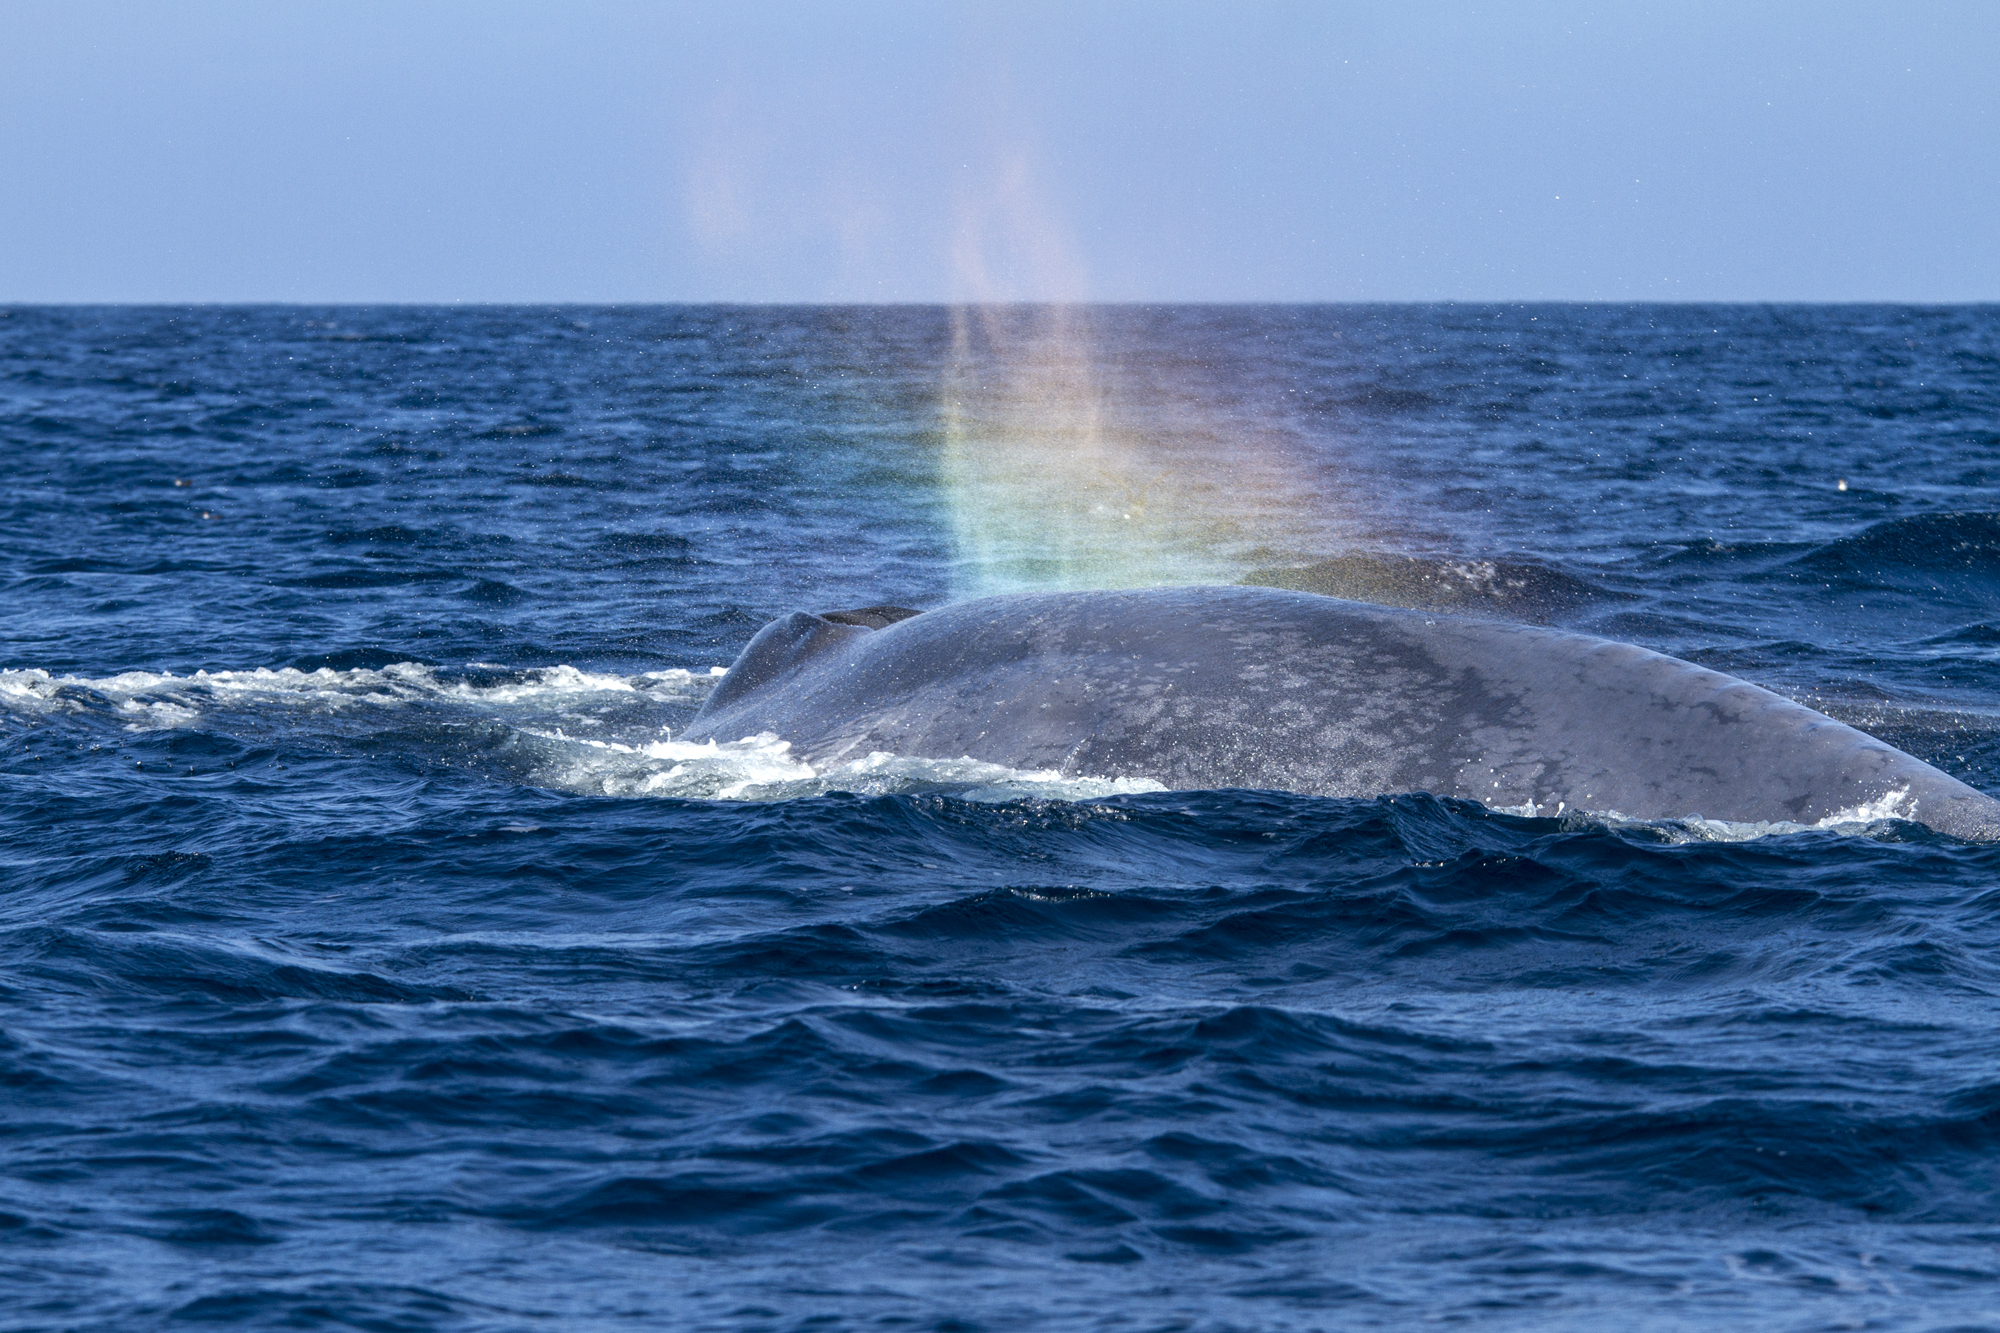 Blue whale off the coast of southern California in 2014